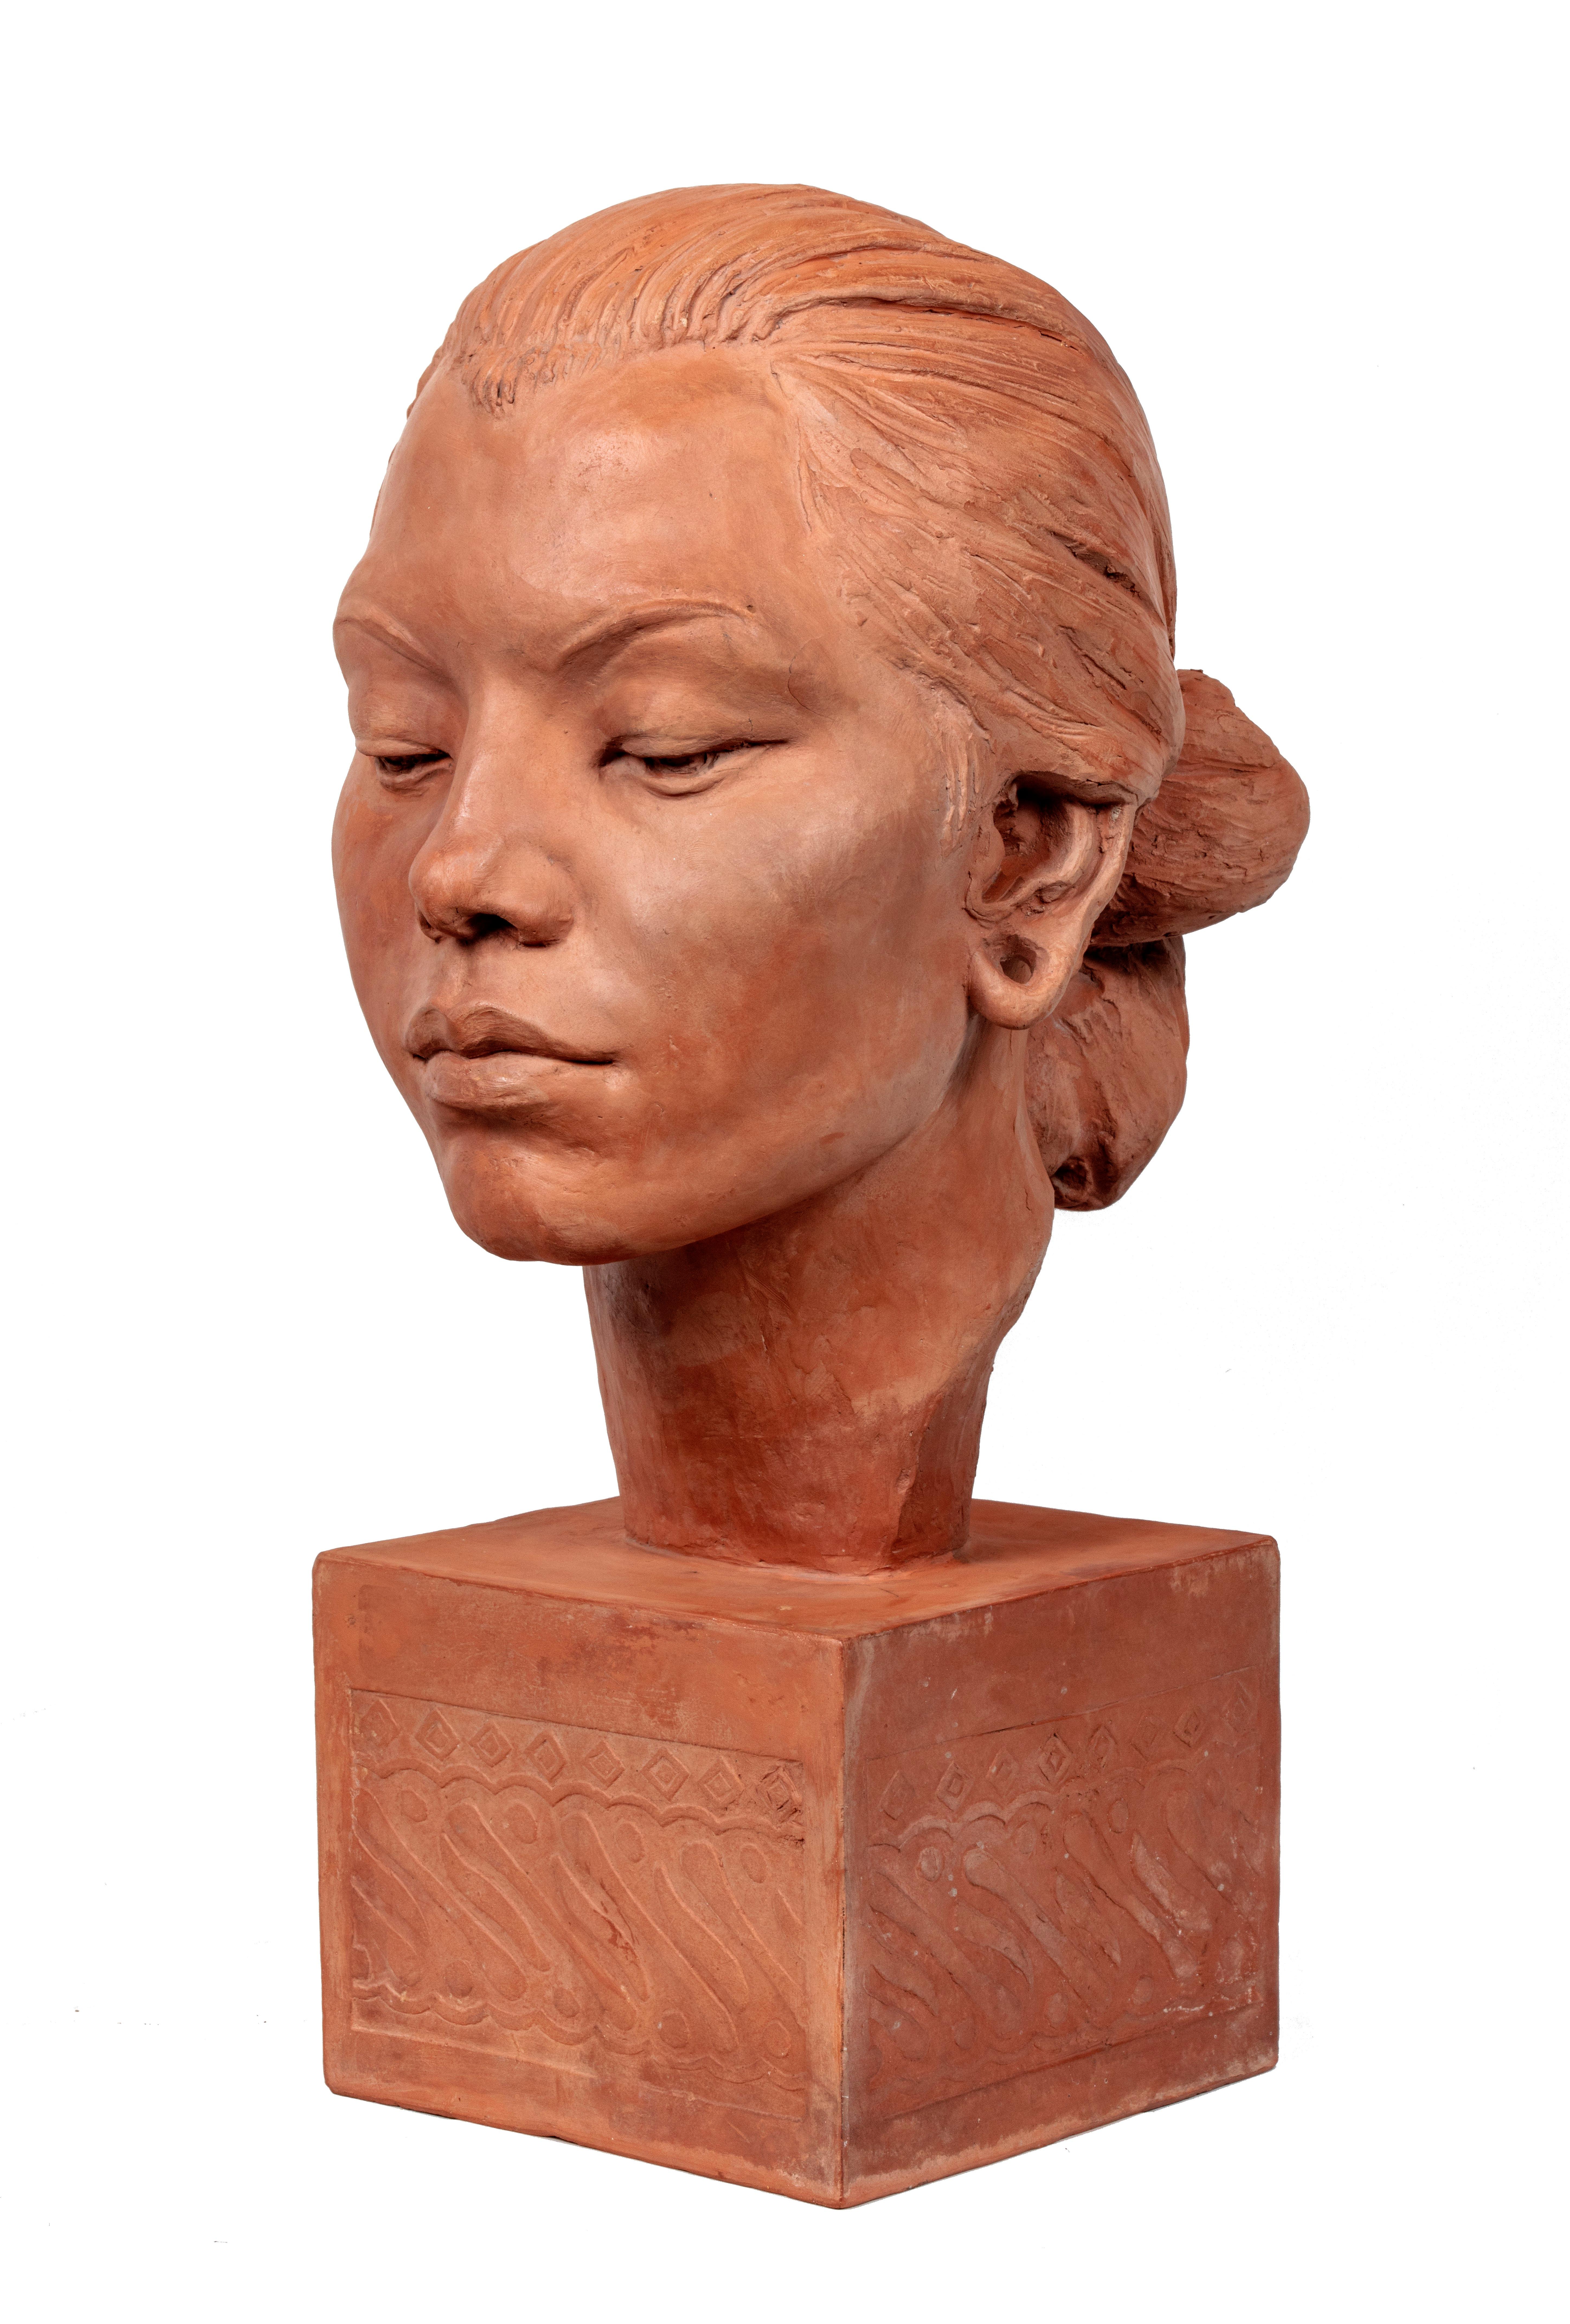 Portrait of Ni-Polog - Sculpture by Malvina Hoffman